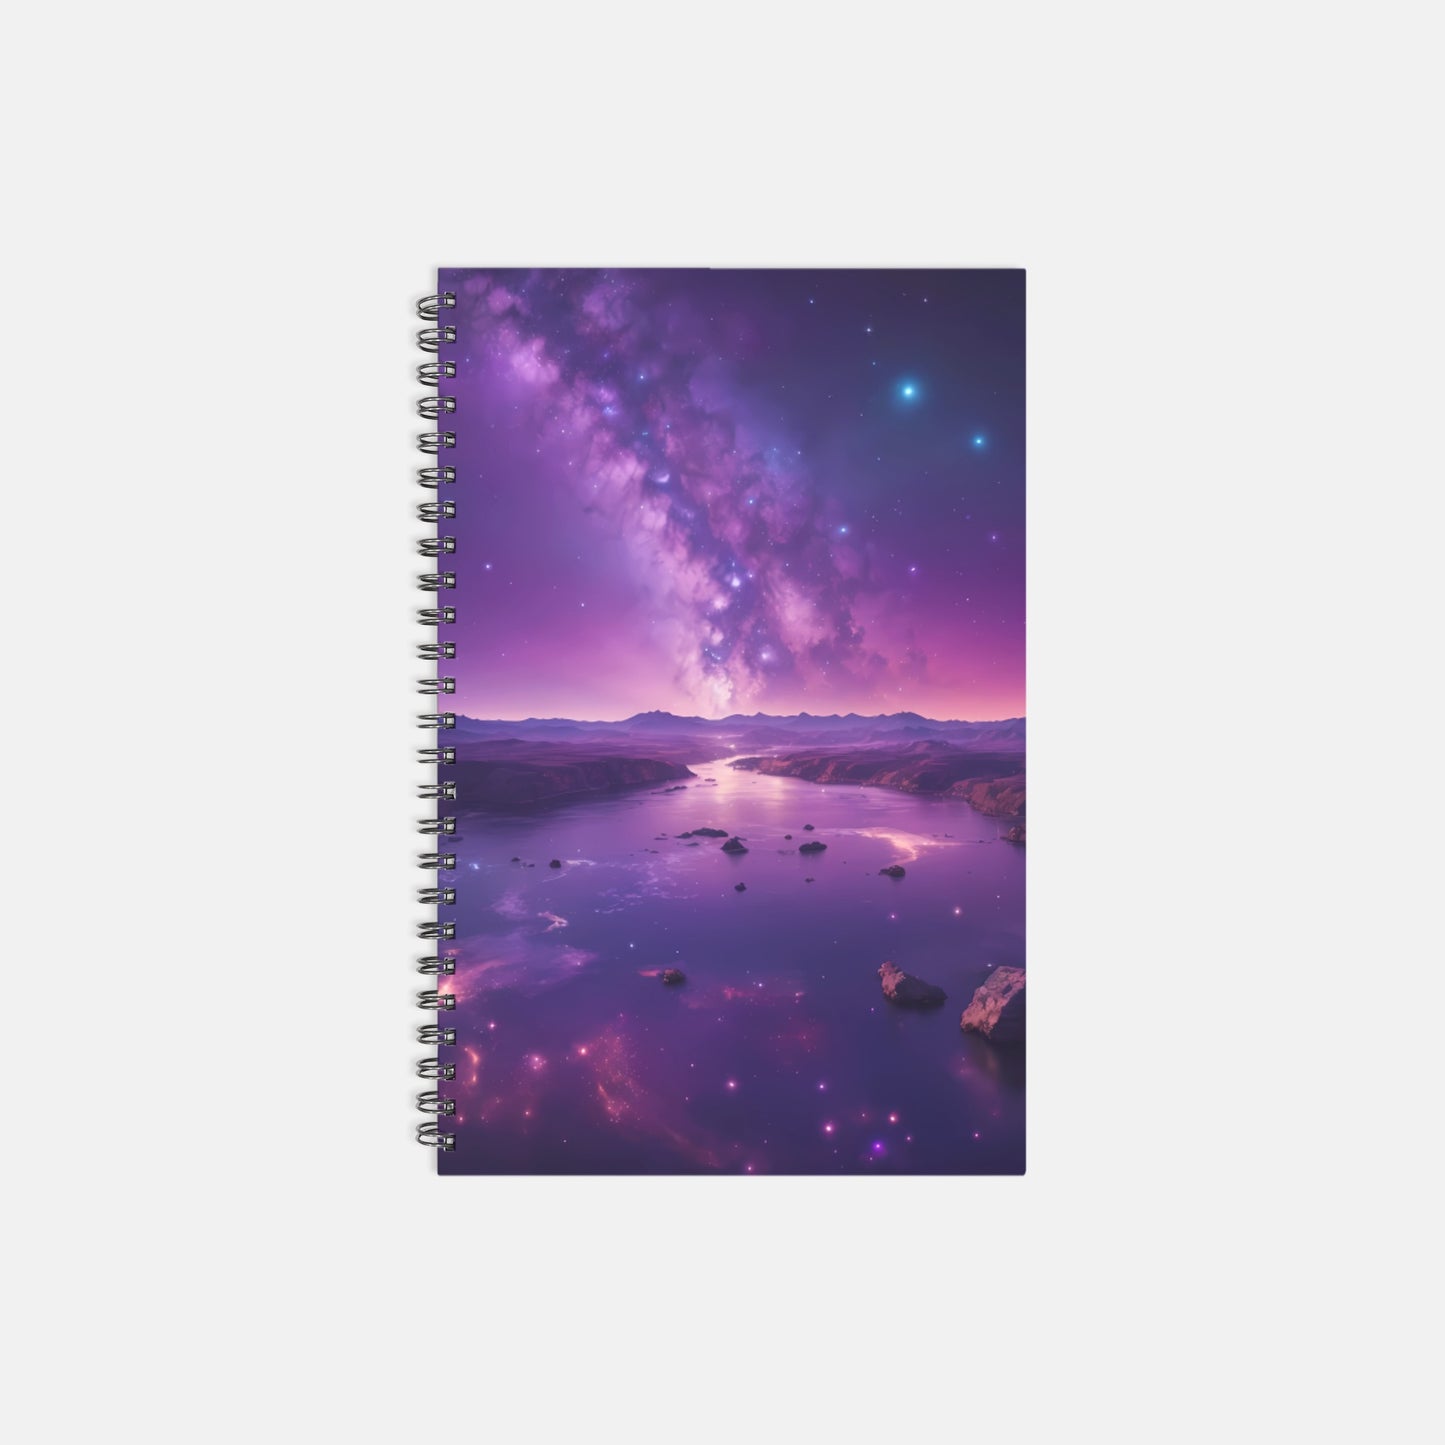 Notebook Softcover Spiral 5.5 x 8.5 - Milky Way River